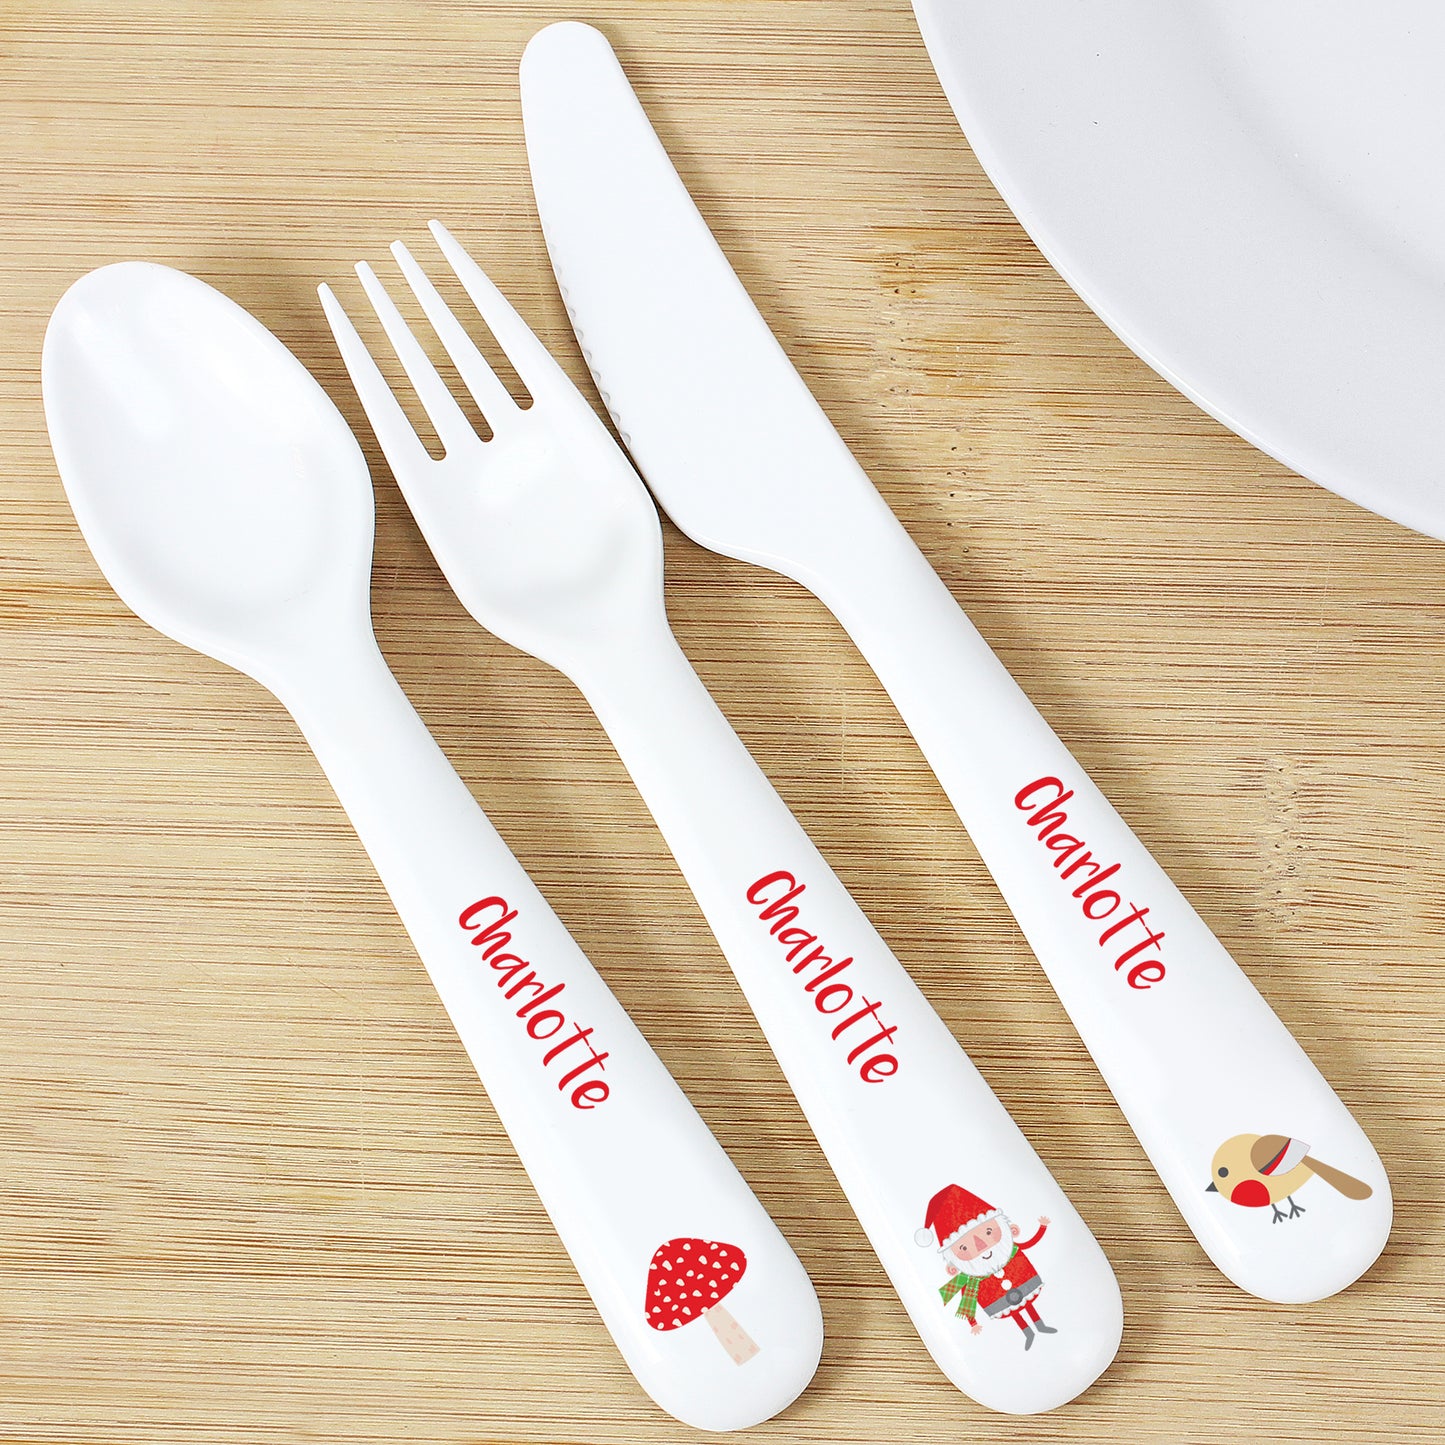 Christmas cutlery set - Lilybet loves